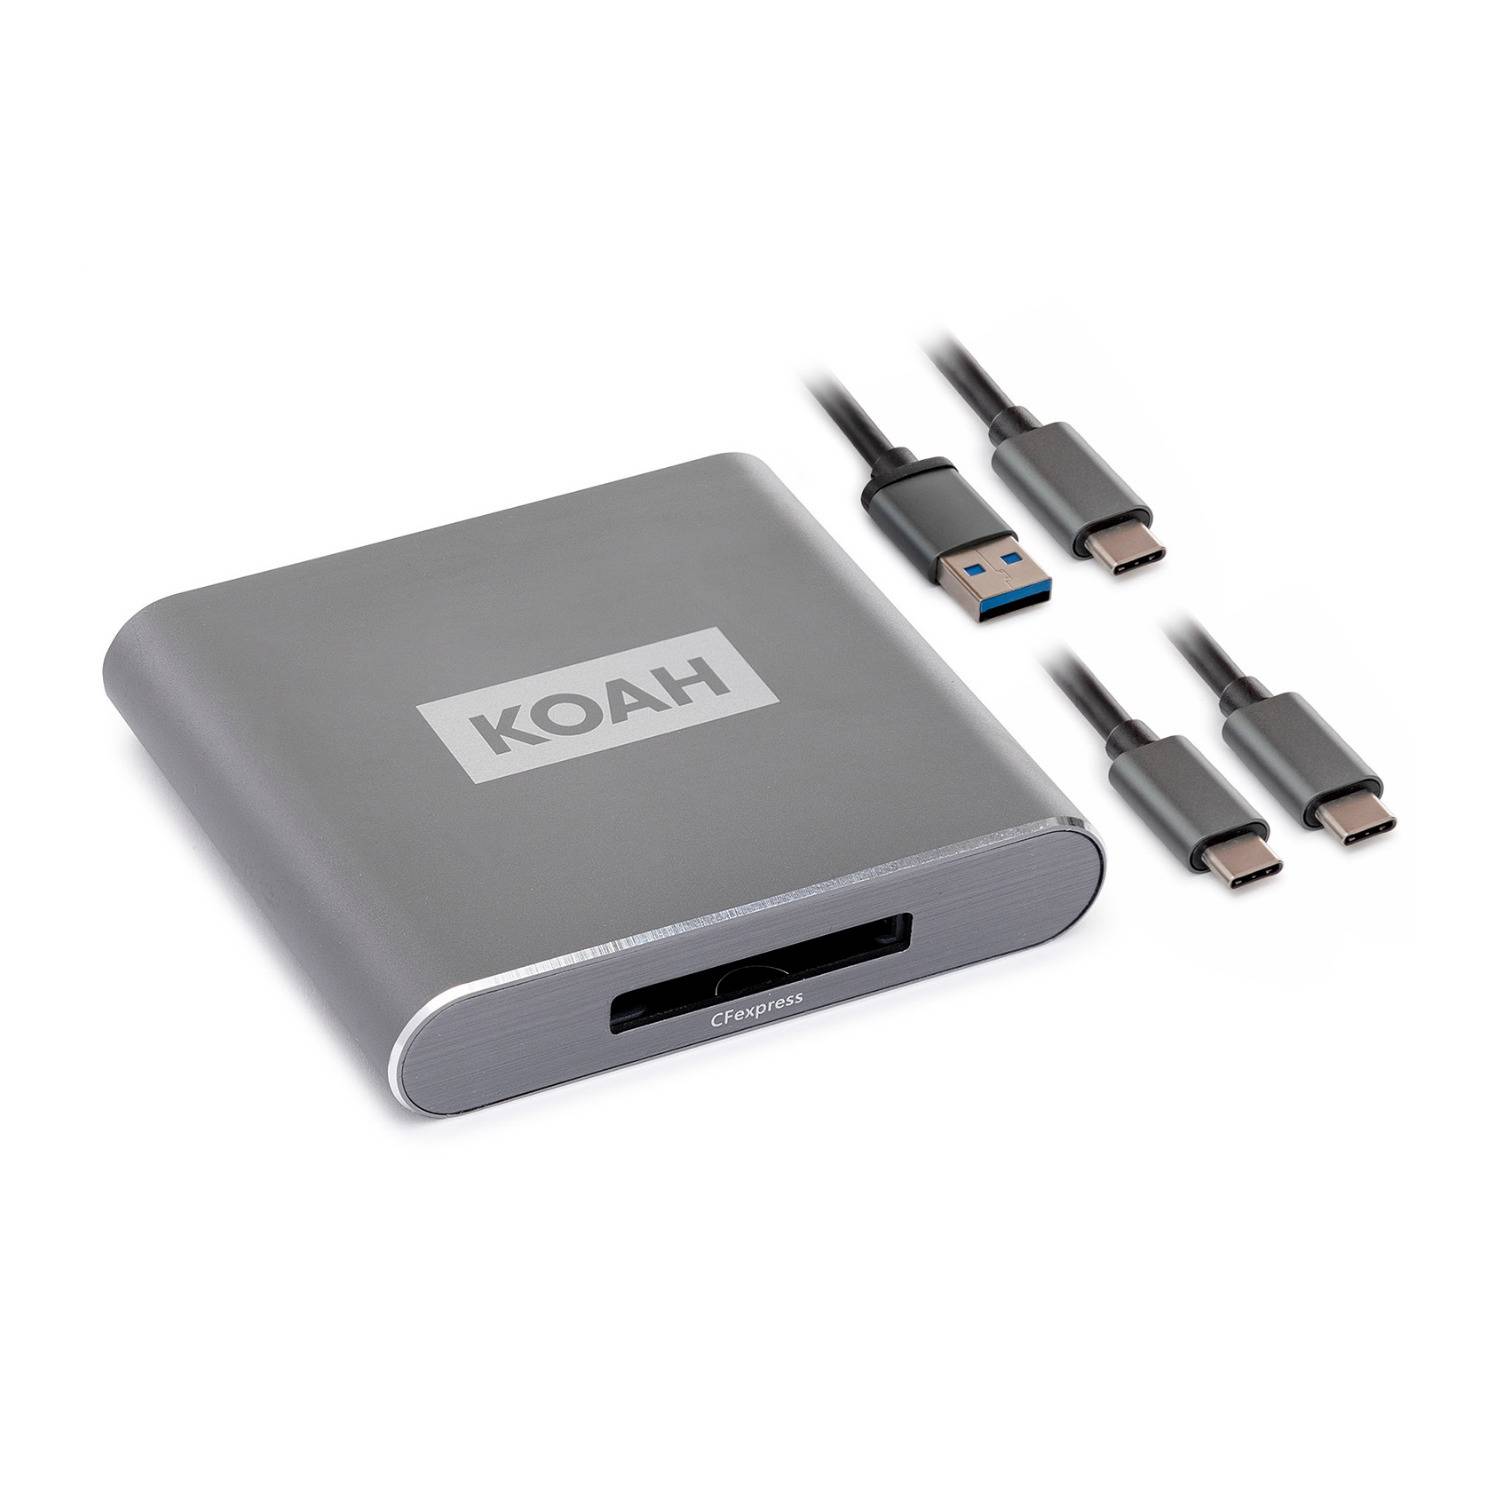 Koah Pro USB 3.2 Type-C Connector 10Gbps CFexpress Type B Card Reader with 2 Cables